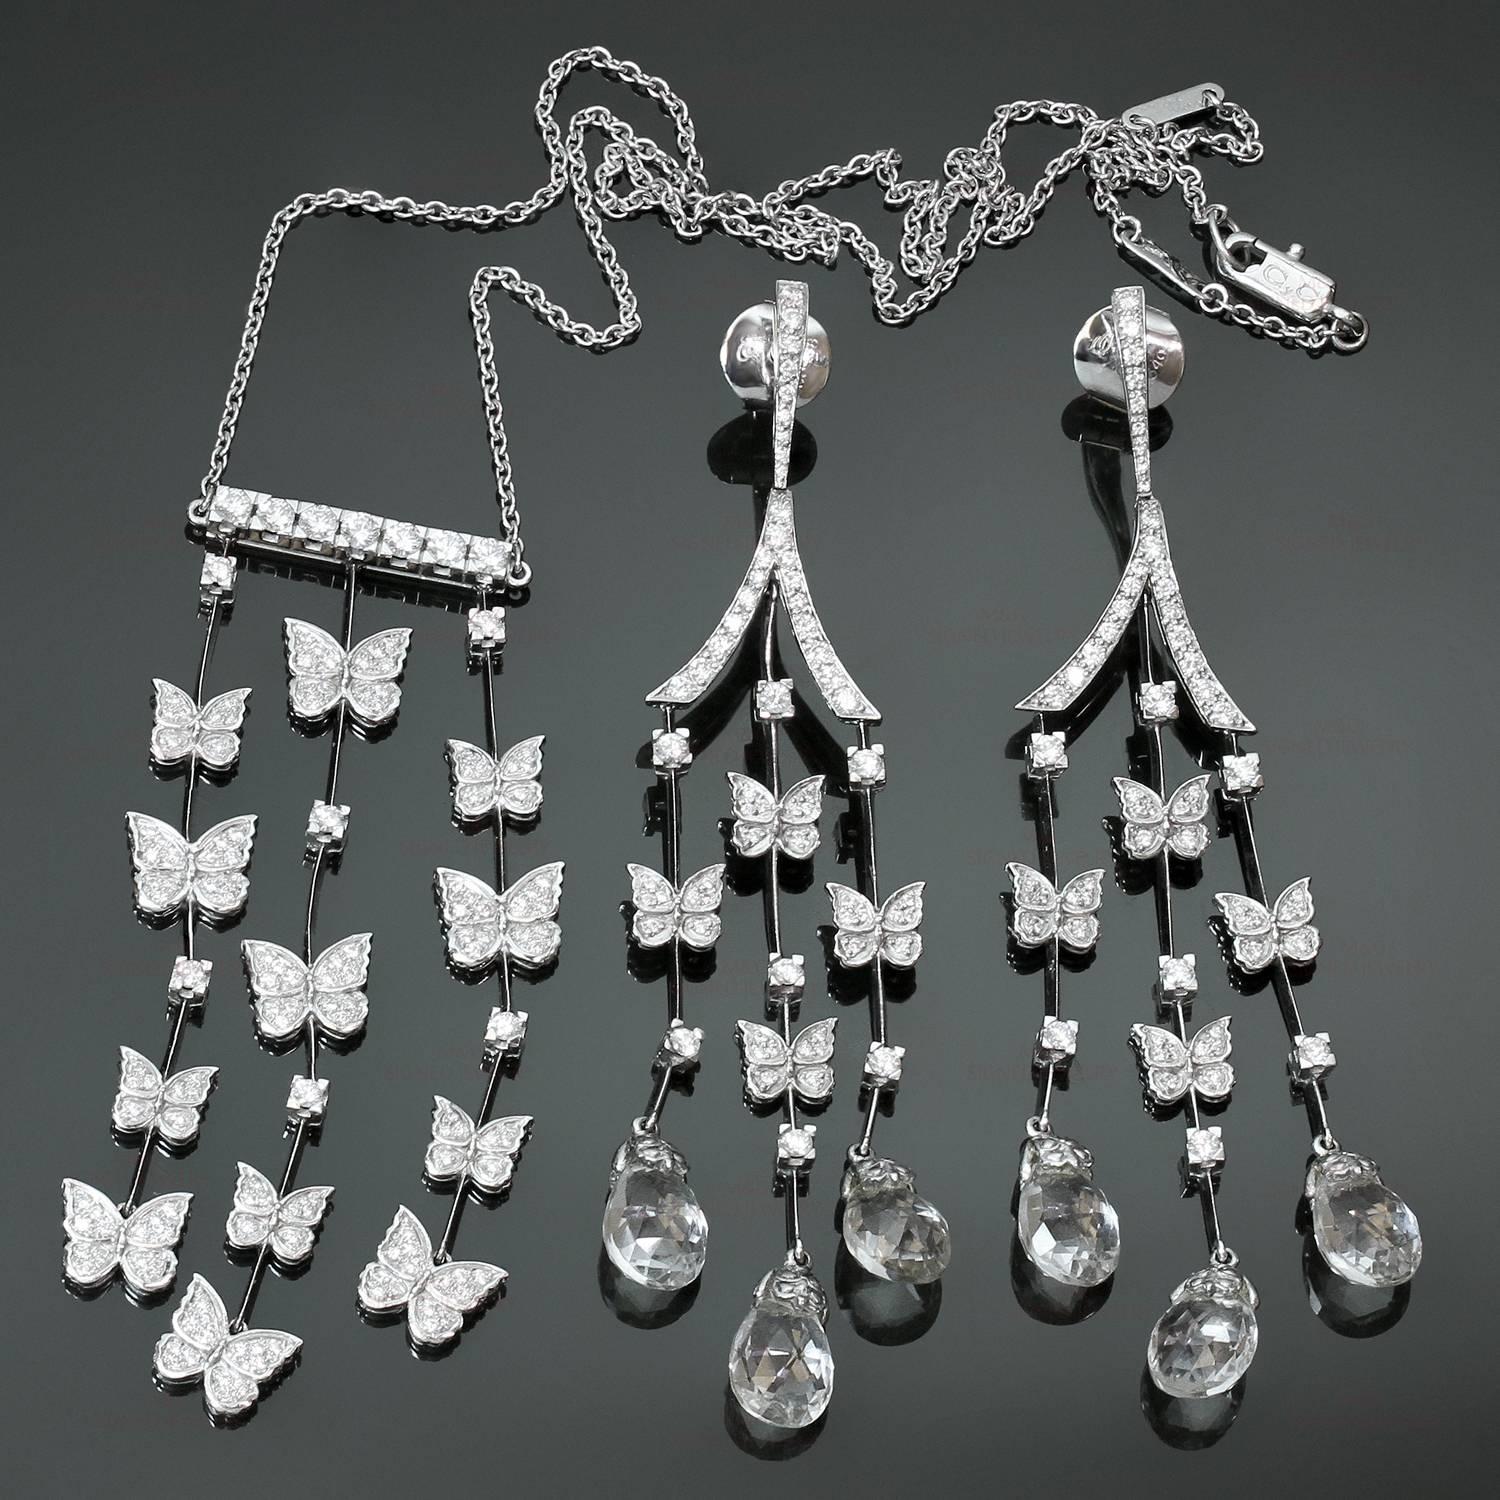 This exquisite set from the Butterflies collection by Carrera Y Carerra is crafted in 18k white gold and features a stunning pendant drop necklace set with 151 diamonds of an estimated 2.05 carats and delicate dangling earrings set with 64 diamonds